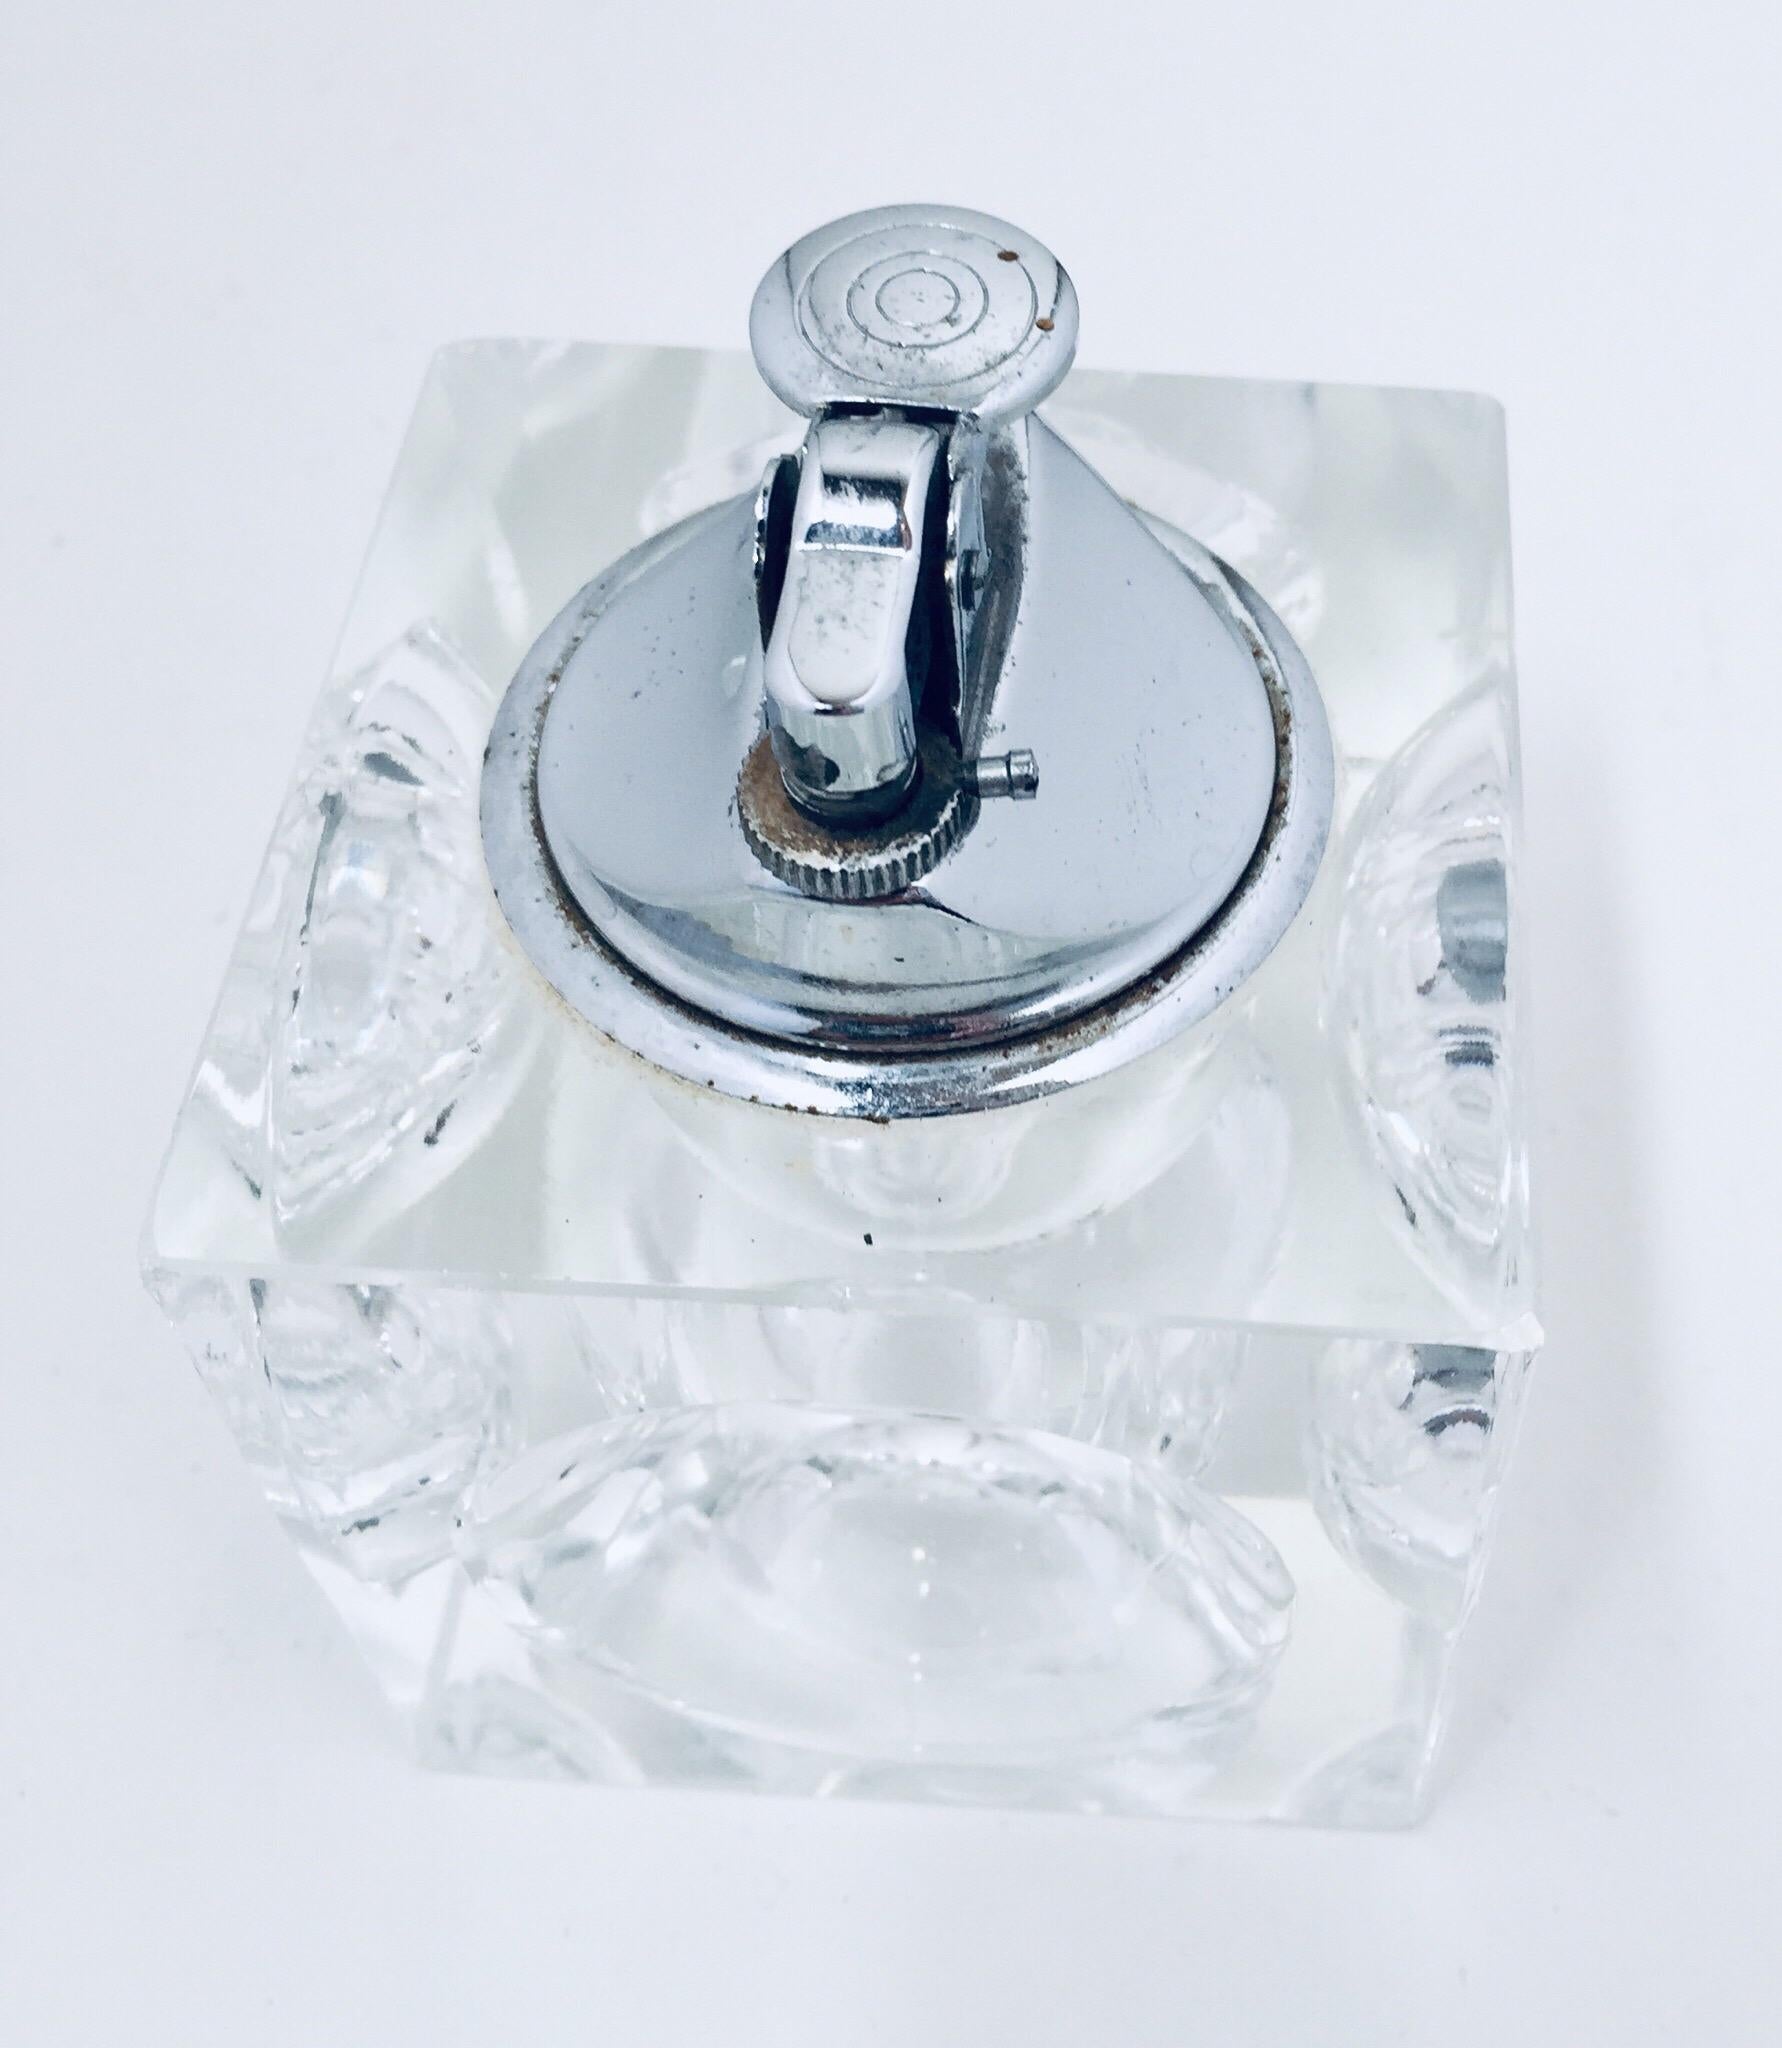 Vintage retro 1970s heavy cut glass cube table lighter-paperweight.
Mid-Century Modern retro square glass lighter with circle cut dimples.
A dramatic accent to any modern living room decor, this square lighter will elevate any coffee table or desk